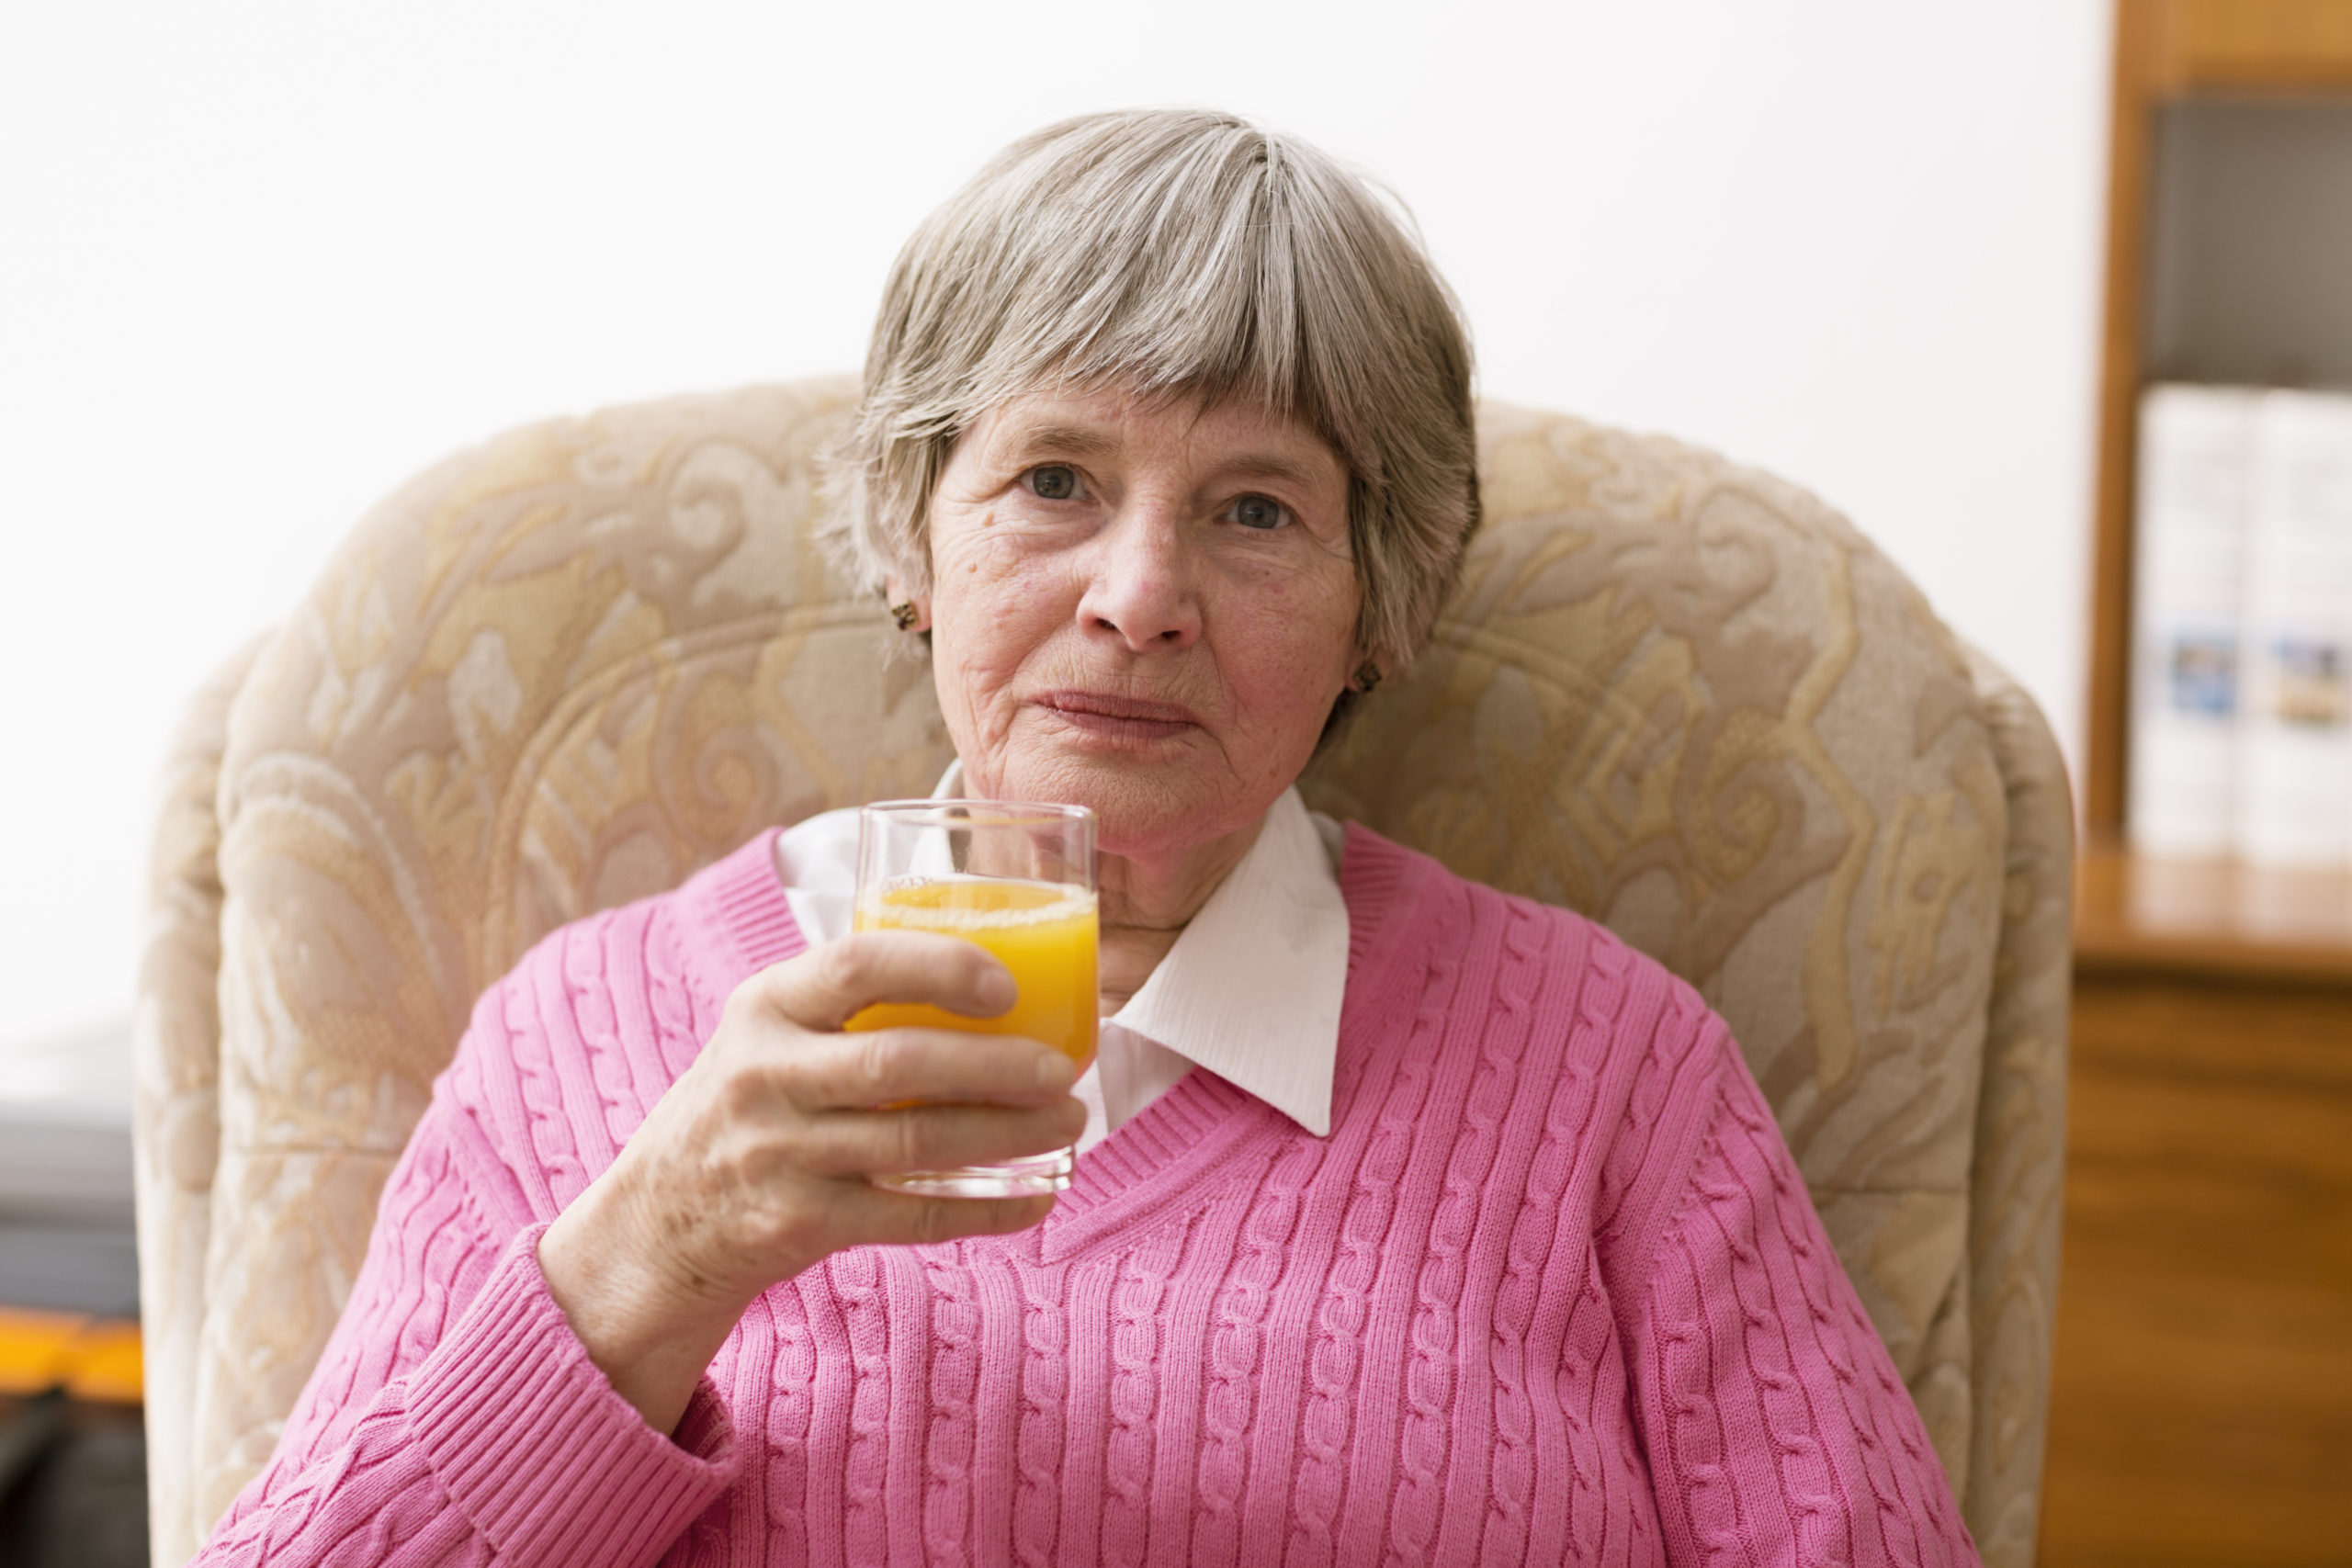 Dementia and Incontinence: 7 Tips to Help